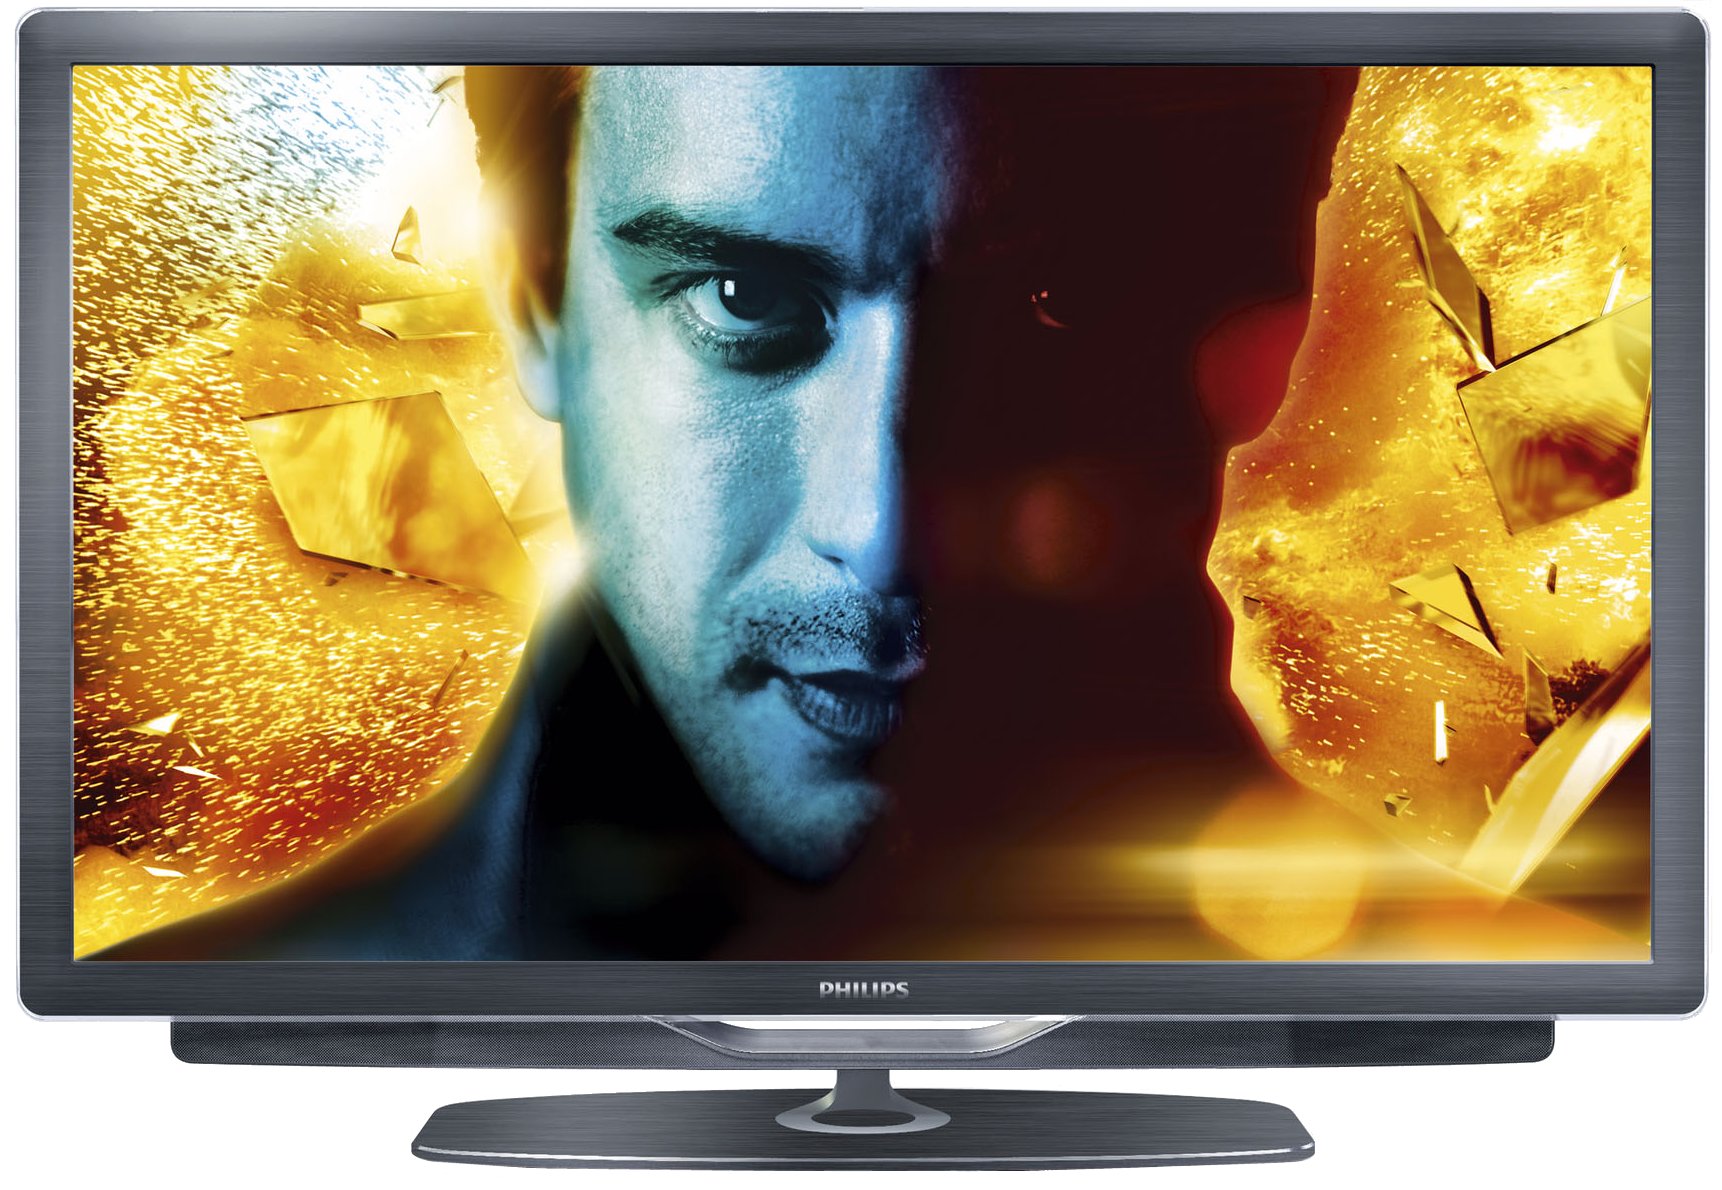 PHILIPS LED 3D TV 40 Inch 9705 5 years warranty large image 0